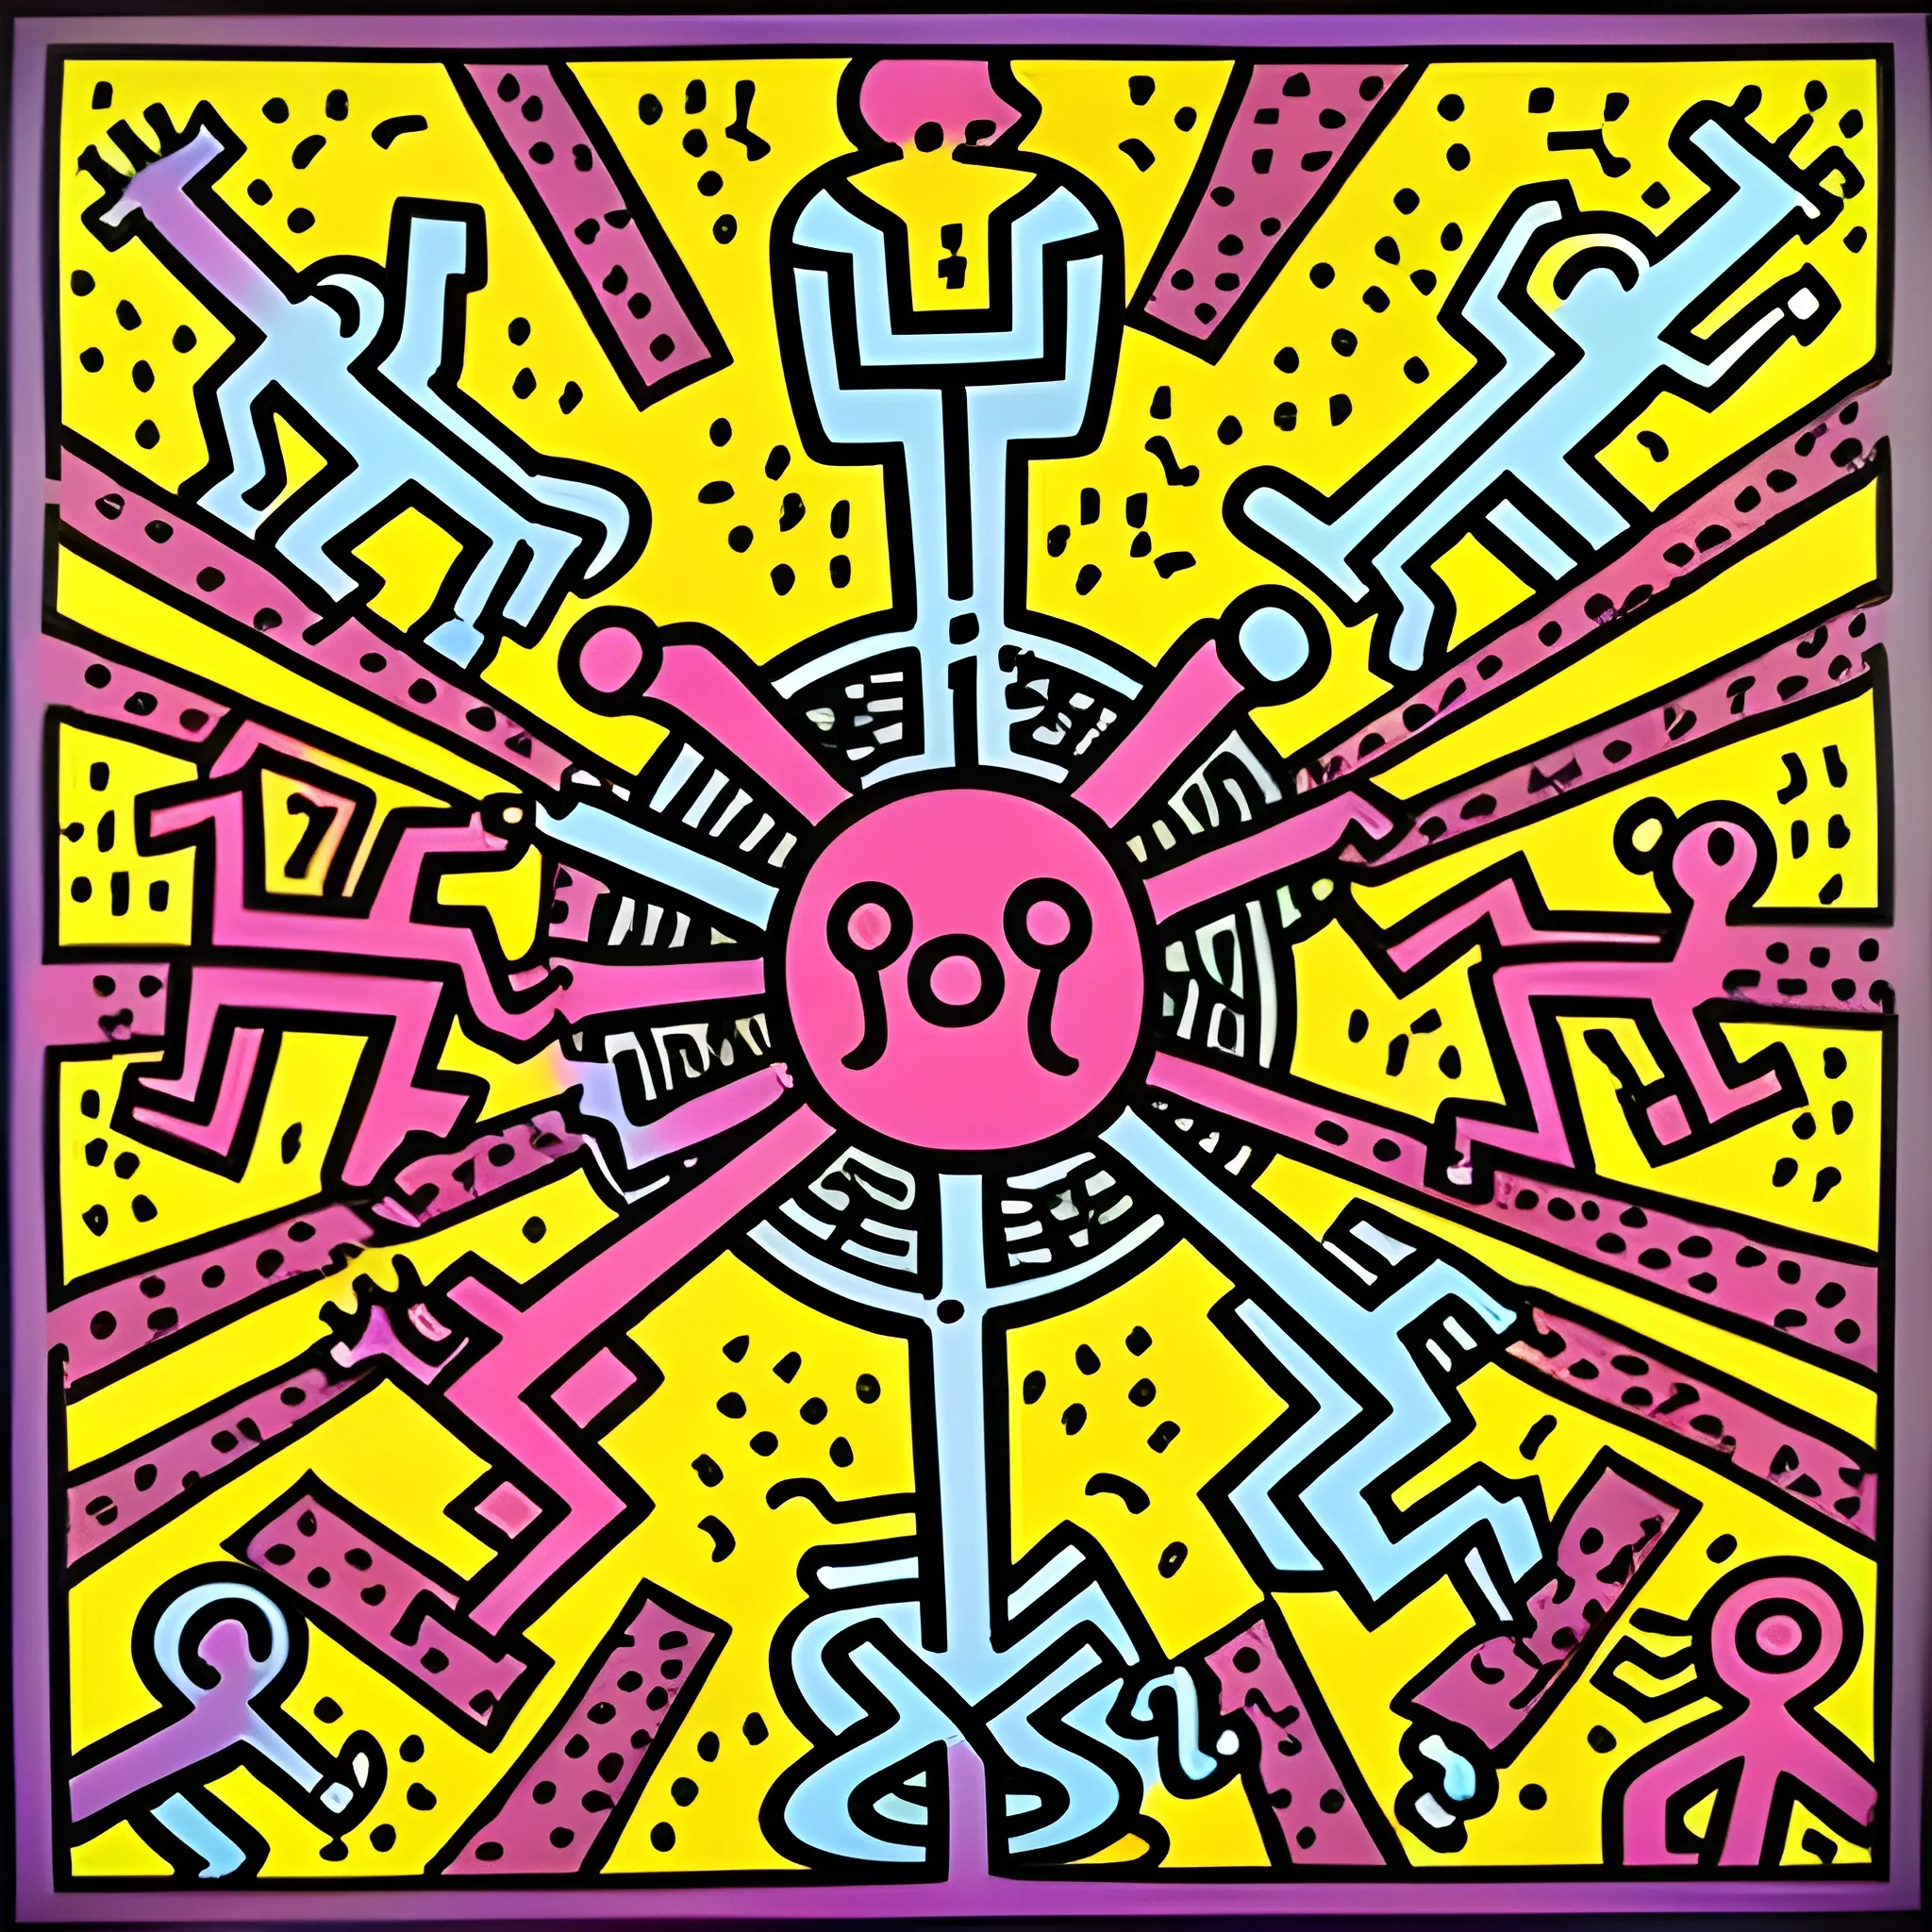 painting, by Hieronymus Bosch, by Keith Haring, psychedelic, men in love, colorful